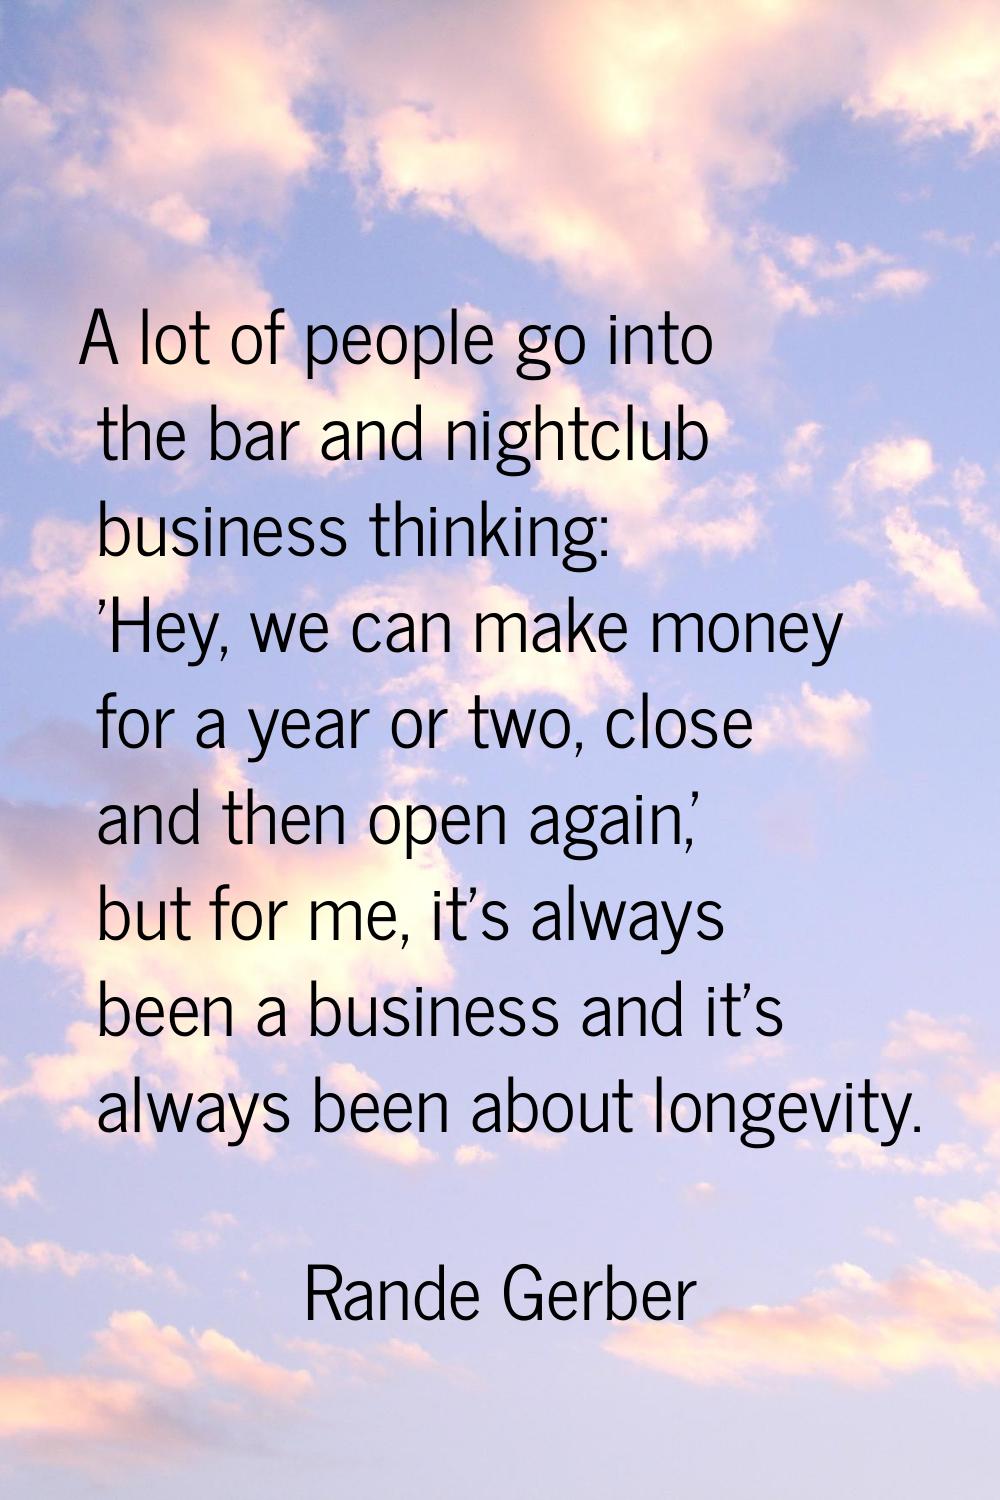 A lot of people go into the bar and nightclub business thinking: 'Hey, we can make money for a year